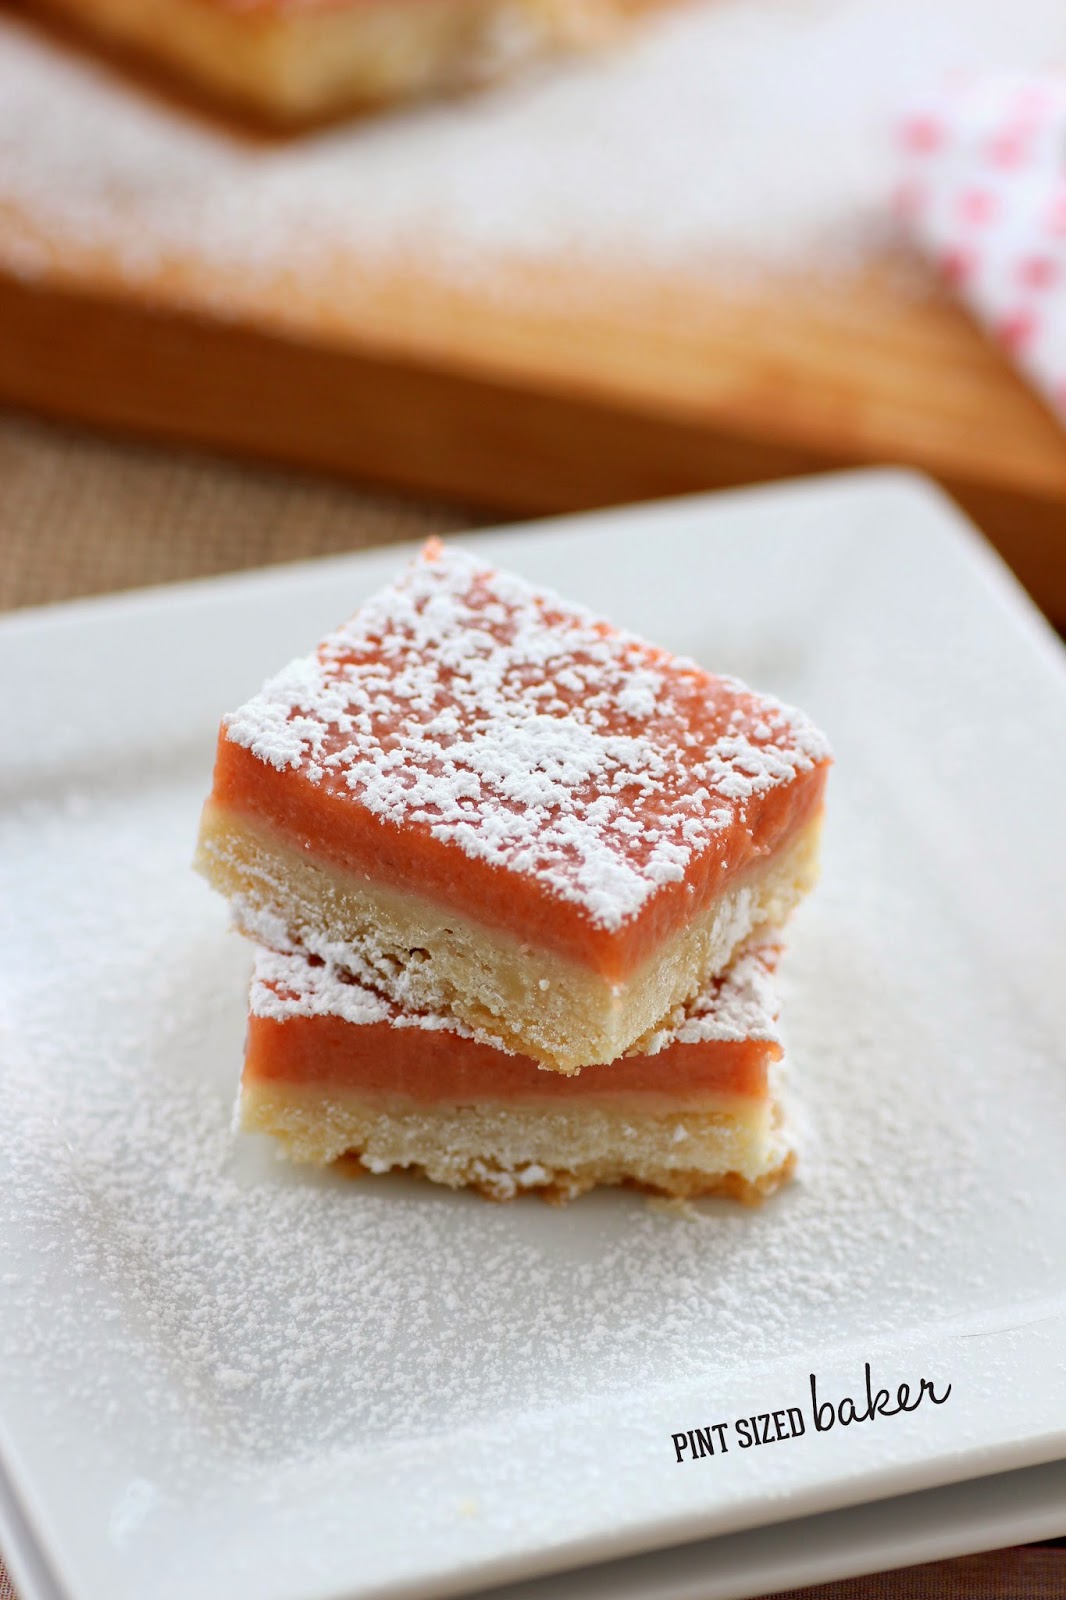 These easy Strawberry Shortbread Bars start off with a homemade strawberry rhubarb curd and end with a YUM! They are a great spring time treat!